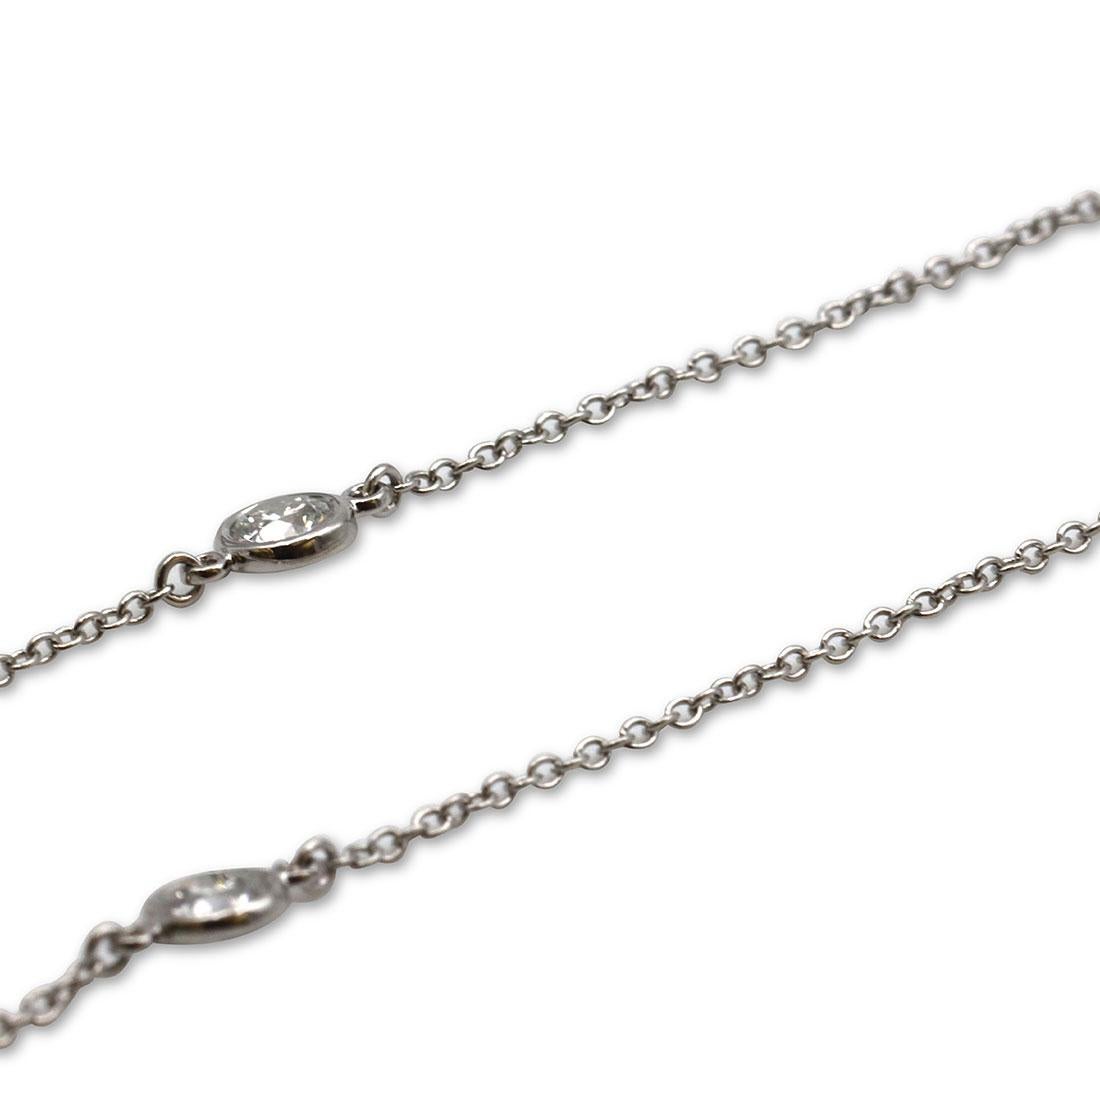 Women's or Men's Elsa Peretti for Tiffany & Co. Diamonds by The Yard Necklace